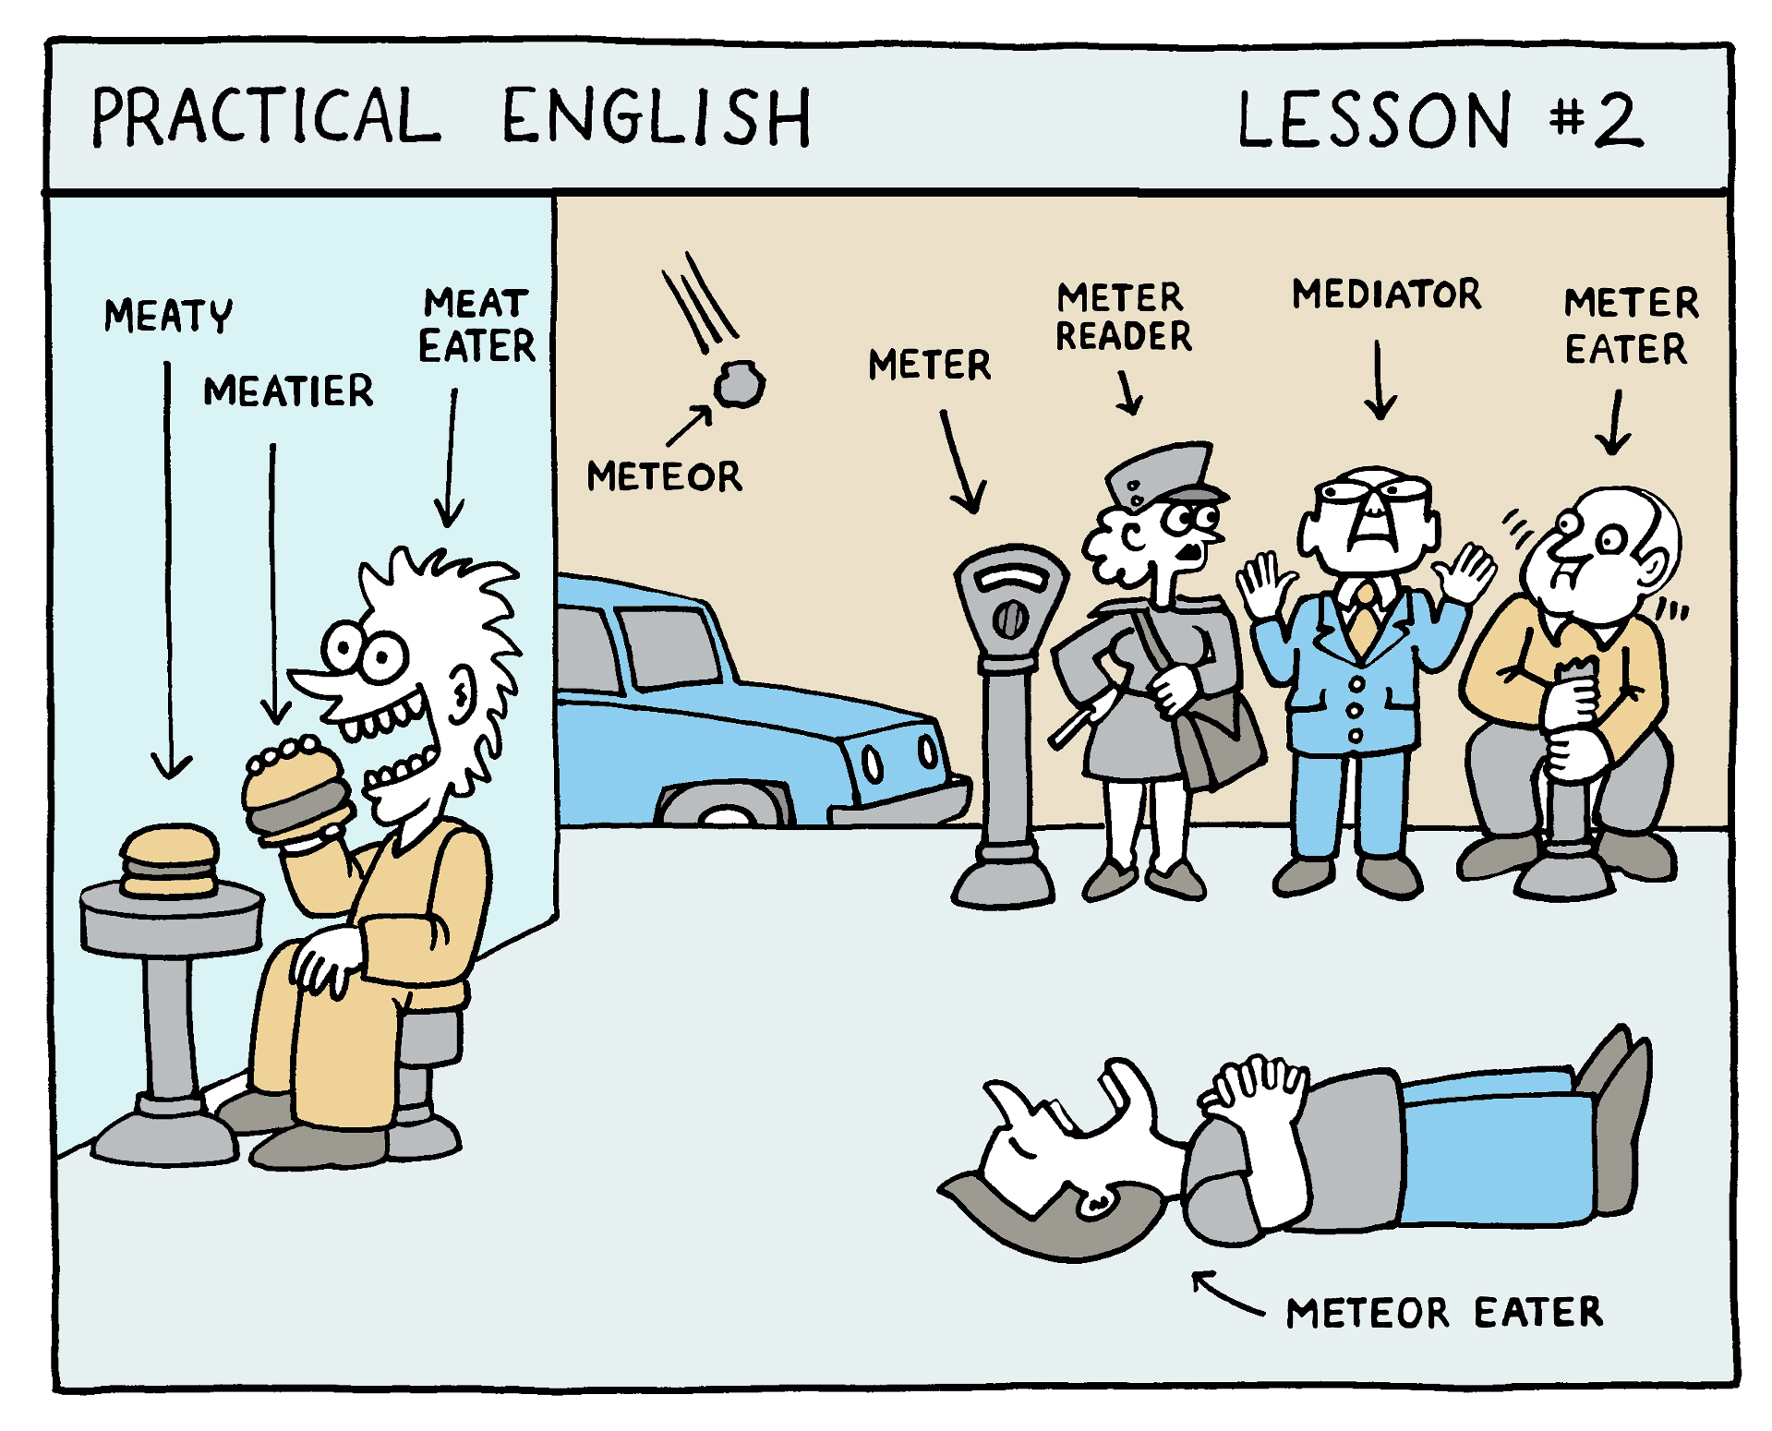 cool funny english comics - Practical English Lesson Mediator Meaty Meatier Meat Eater Meter Reader Meter Eater Meter Meteor rum Meteor Eater